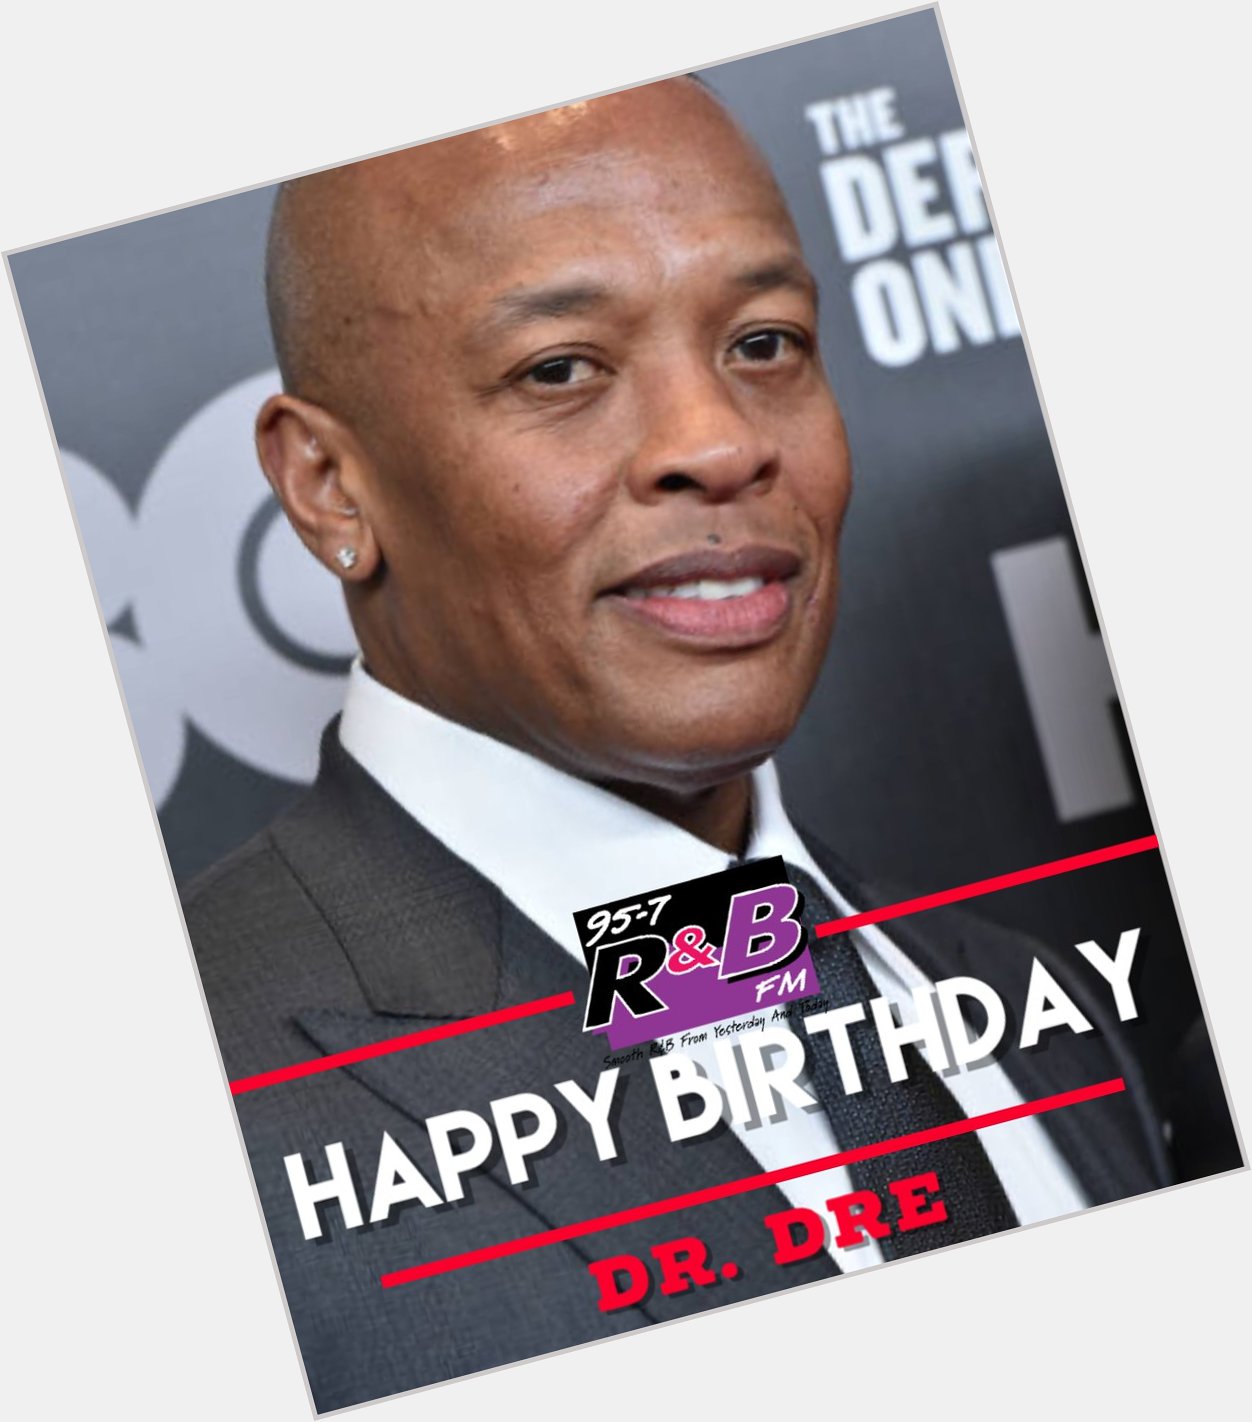 Happy Birthday to Hip Hop legend Dr.Dre who turns 55 today! 